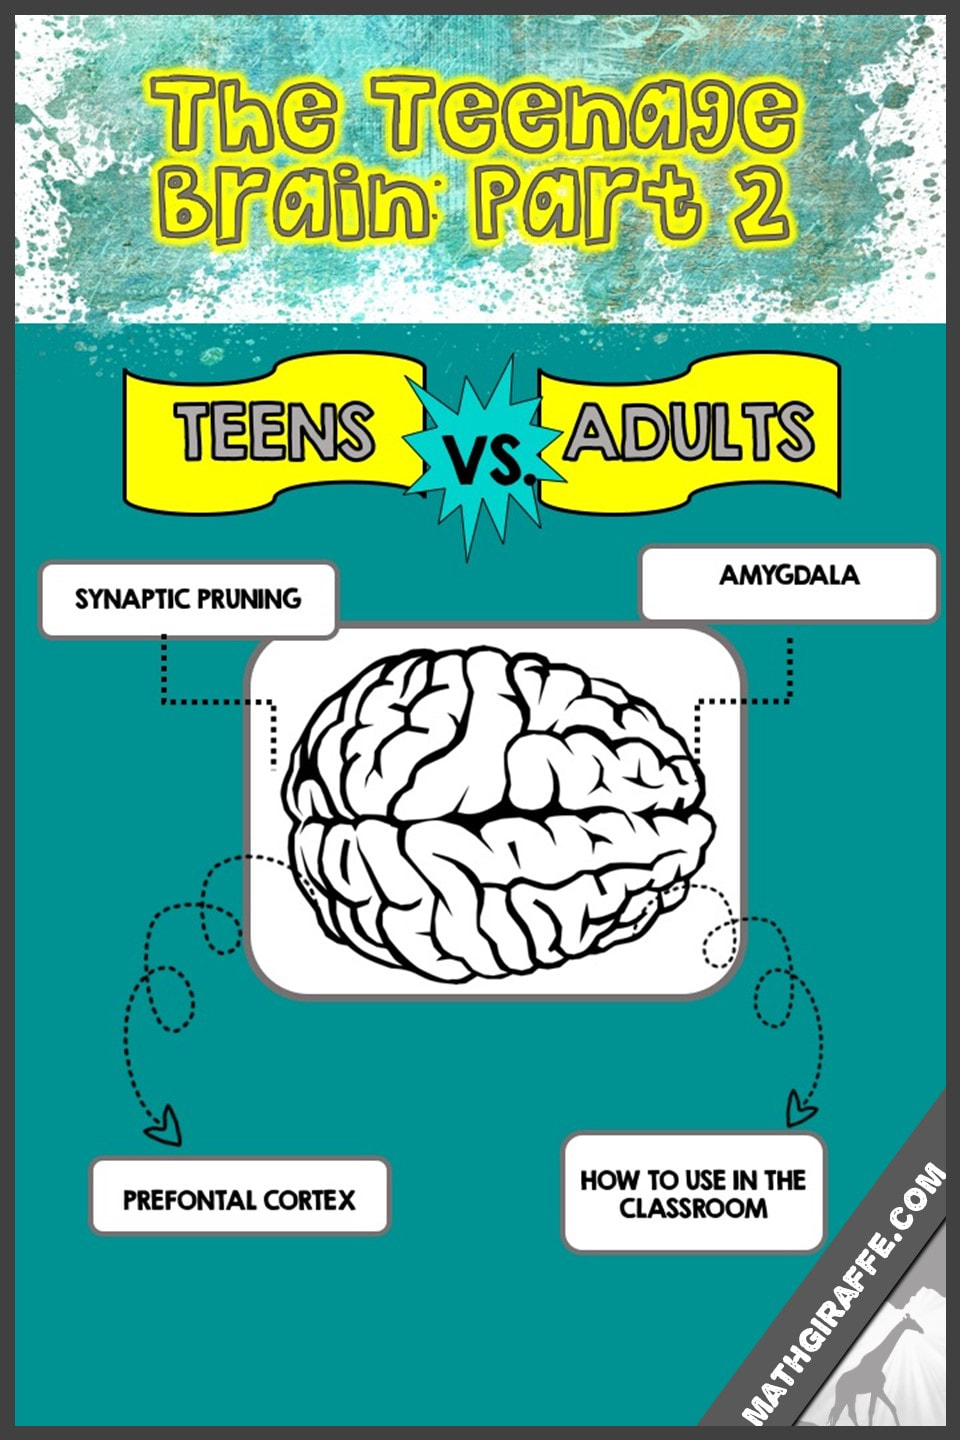 Teaching teenagers more effectively with an awareness of their brain development (comparing teen and adult brains and how they think, act, and learn)